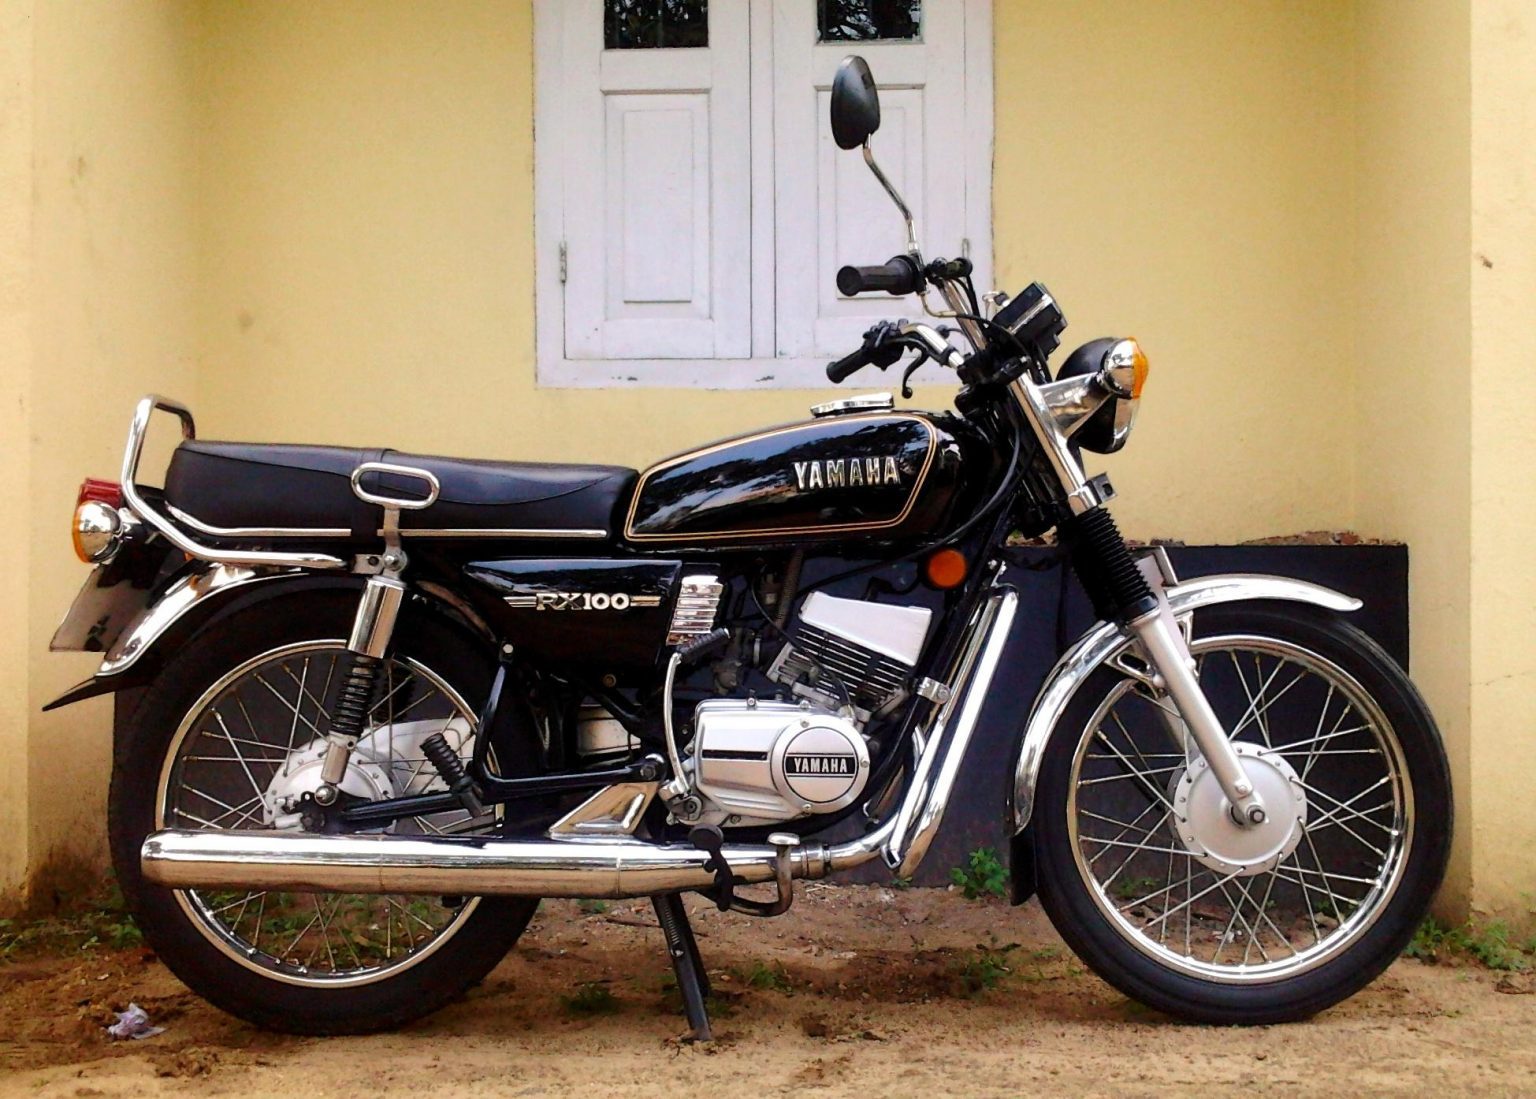 Yamaha RX 100 Price in Bangladesh - Find It's Price